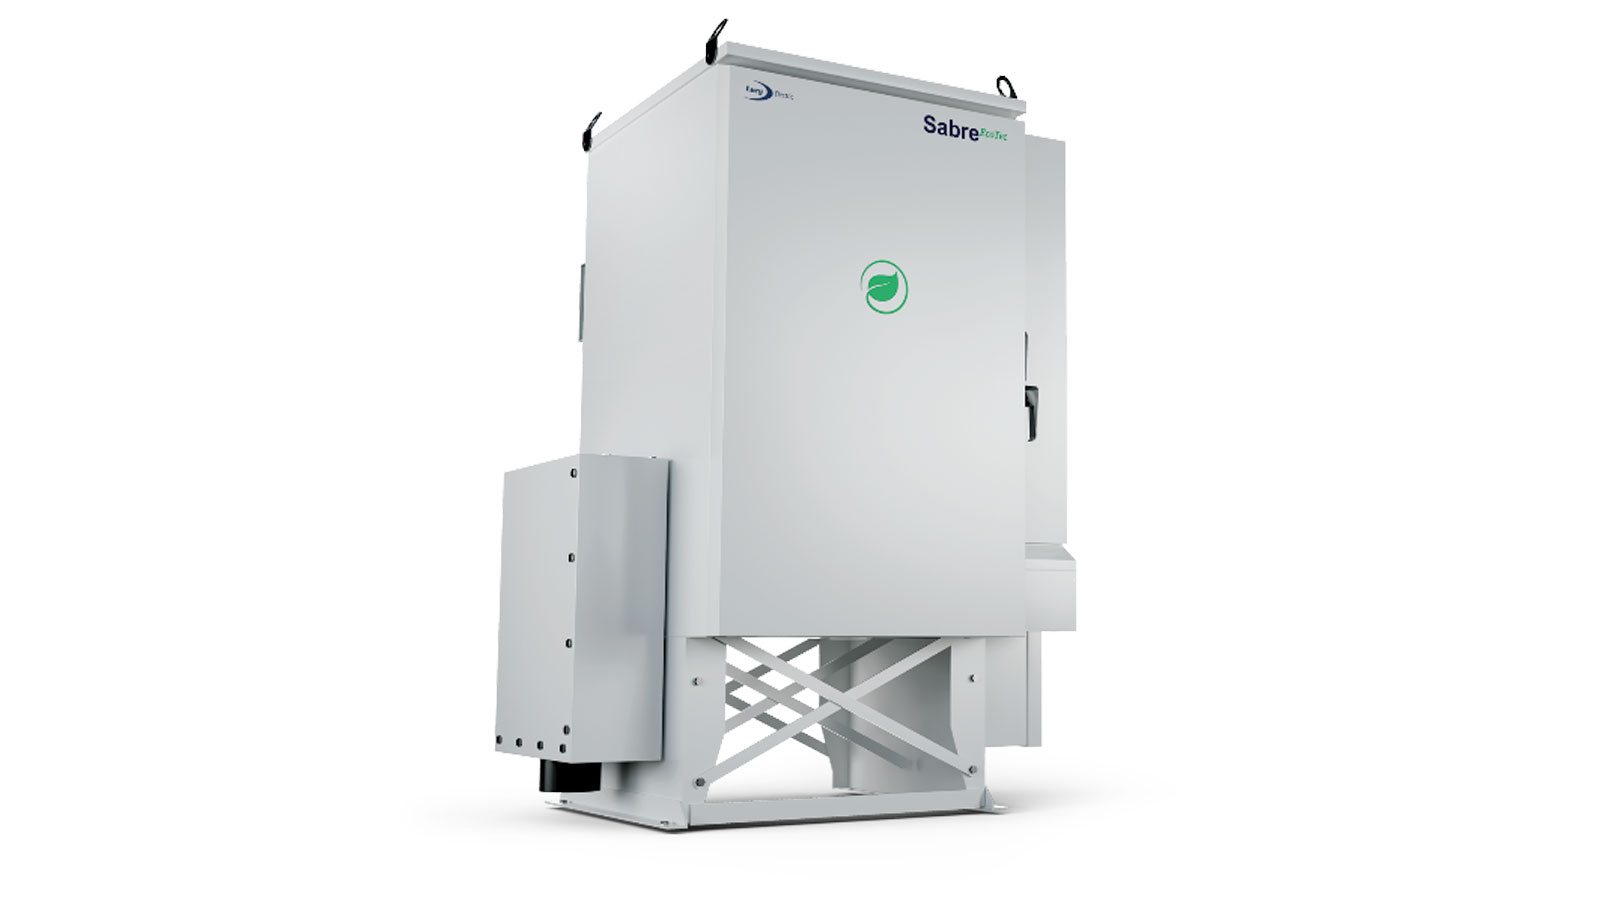 Lucy Electric has unveiled EcoTec, the first ring main unit (RMU) of its kind in the UK, designed for medium voltage networks without the use of Sulphur hexafluoride (SF6).